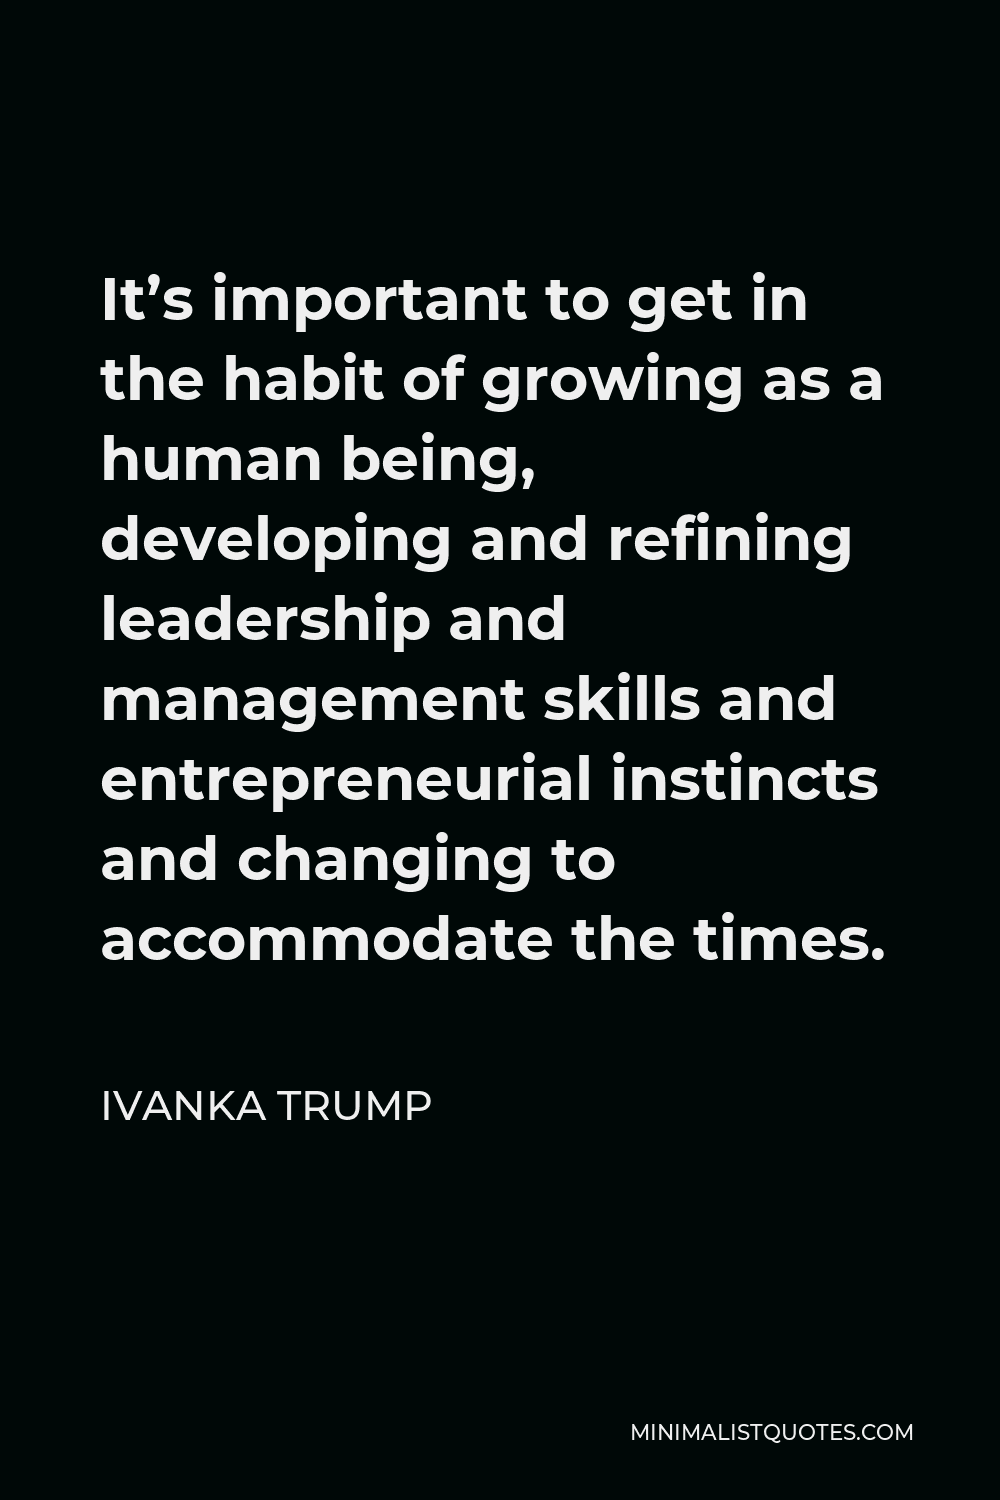 Ivanka Trump Quote - It’s important to get in the habit of growing as a human being, developing and refining leadership and management skills and entrepreneurial instincts and changing to accommodate the times.